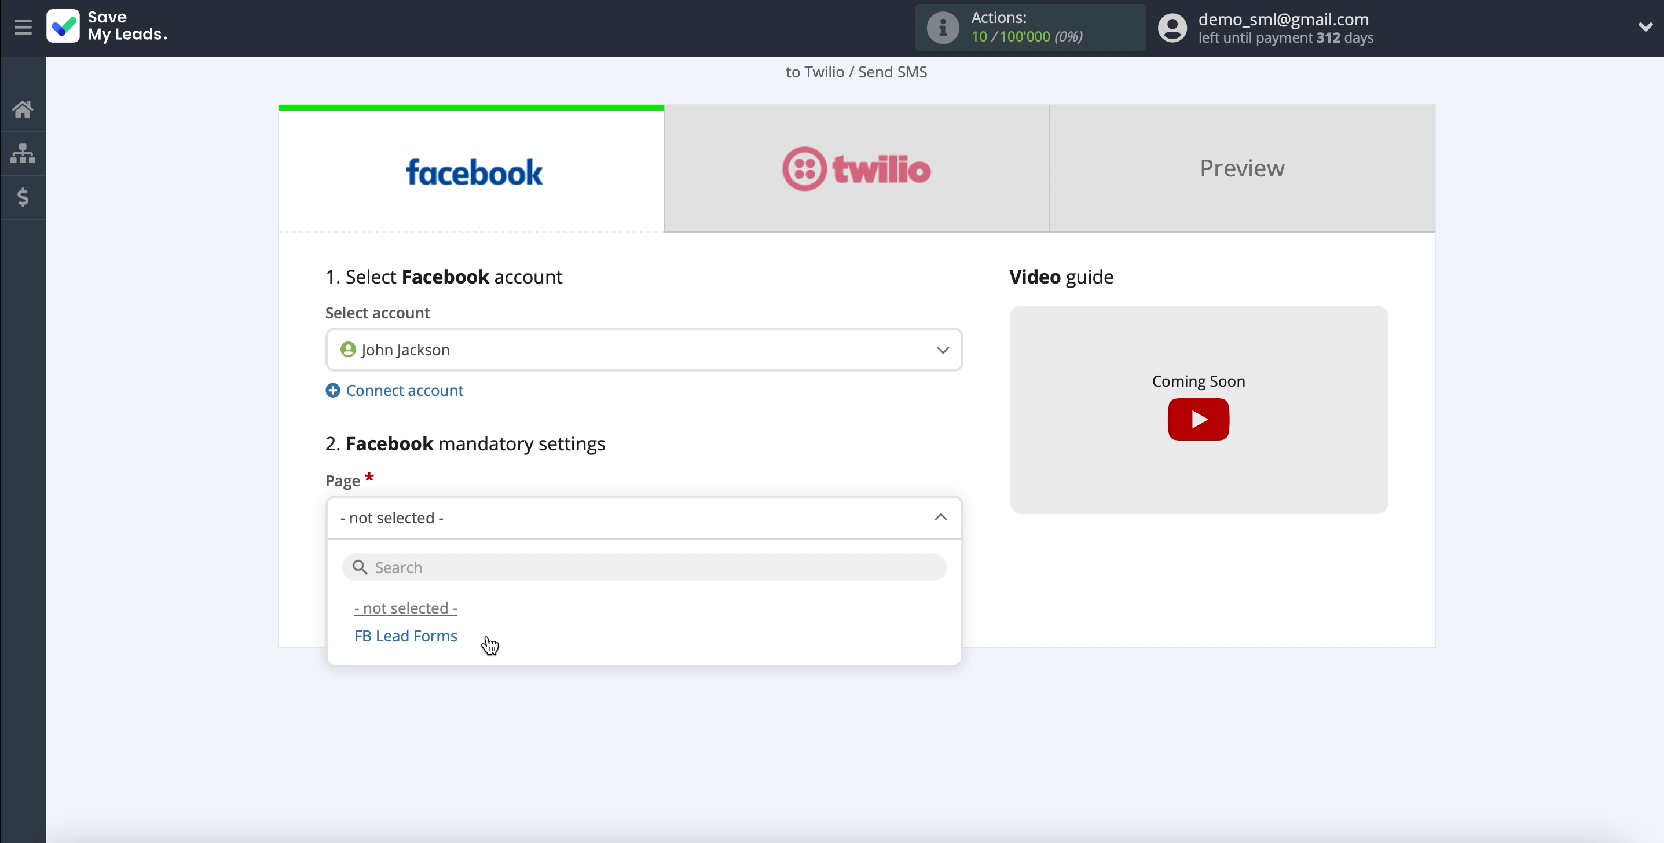 Facebook and Twilio integration | Choosing an ad page